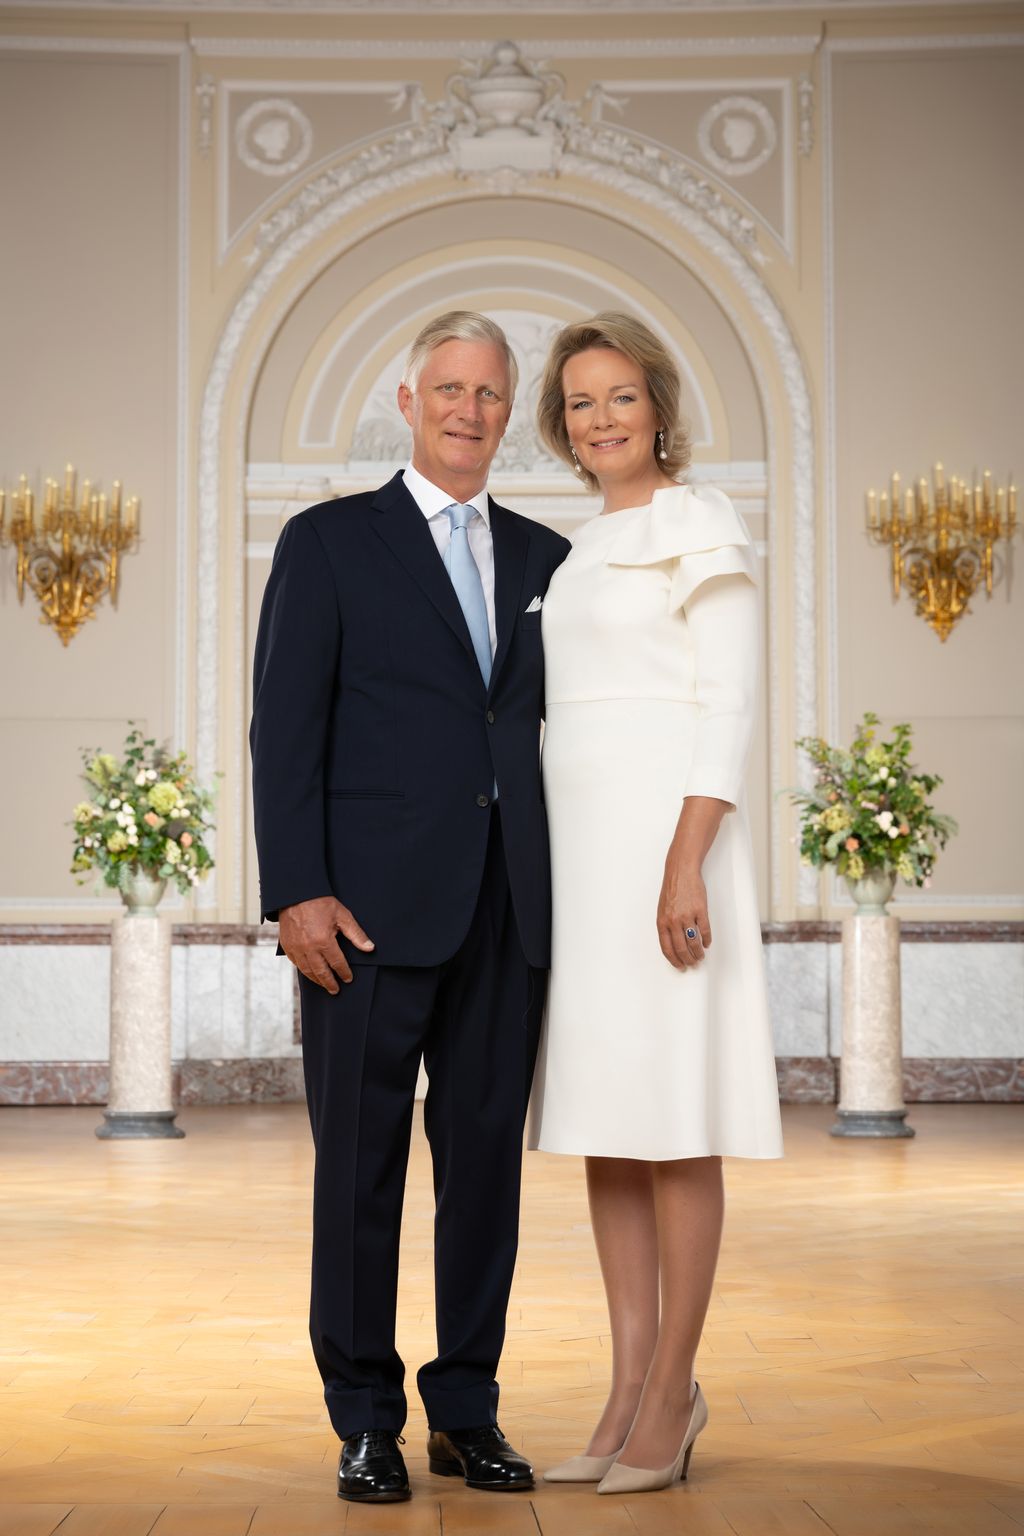 King Philippe and Queen Mathilde portrait